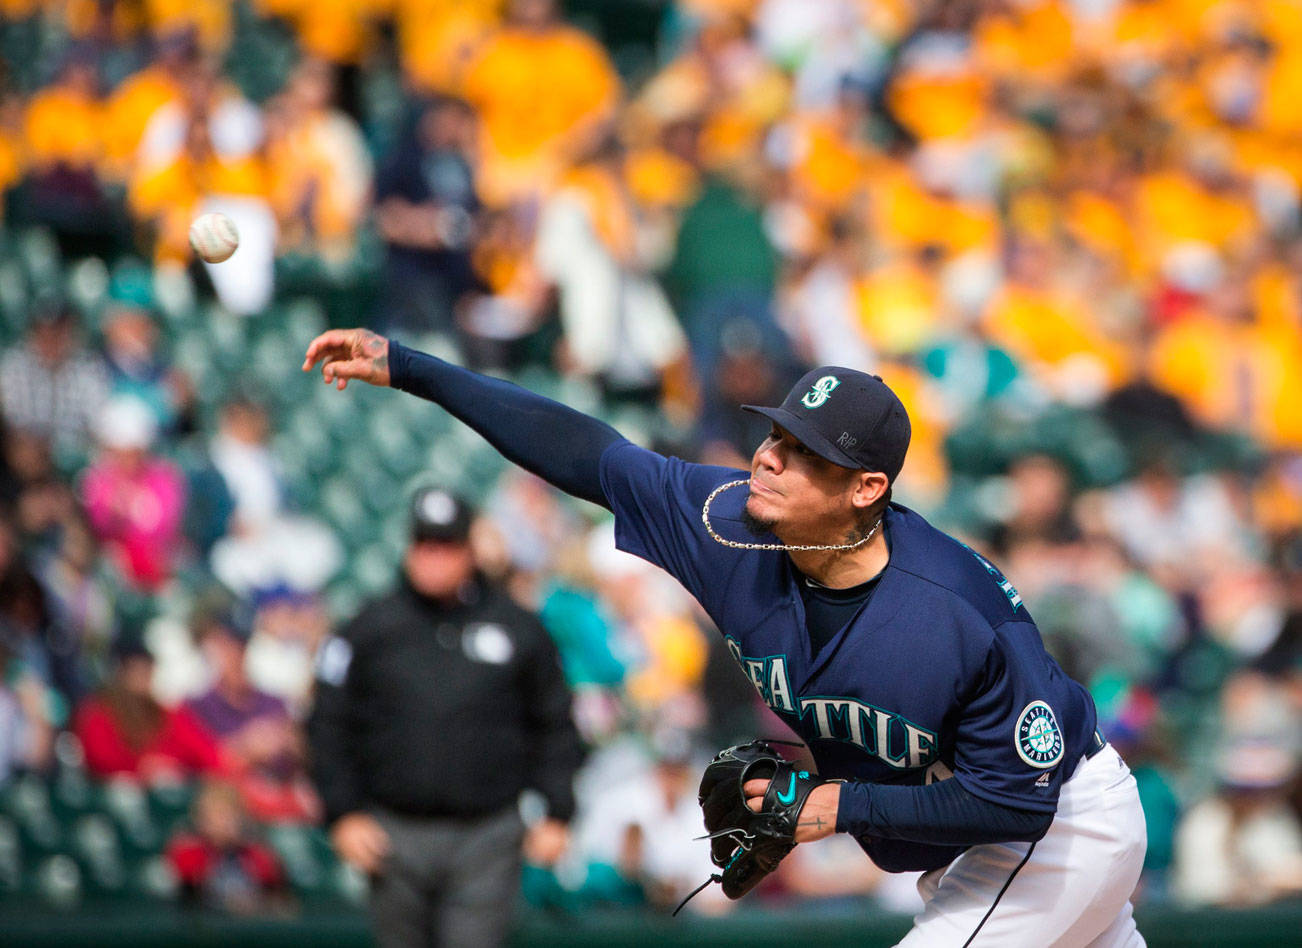 (Lindsey Wasson | Seattle Times) Seattle’s Felix Hernandez will be the Opening Day starter as the Mariners set their pitching rotation for the start of the 2017 season.